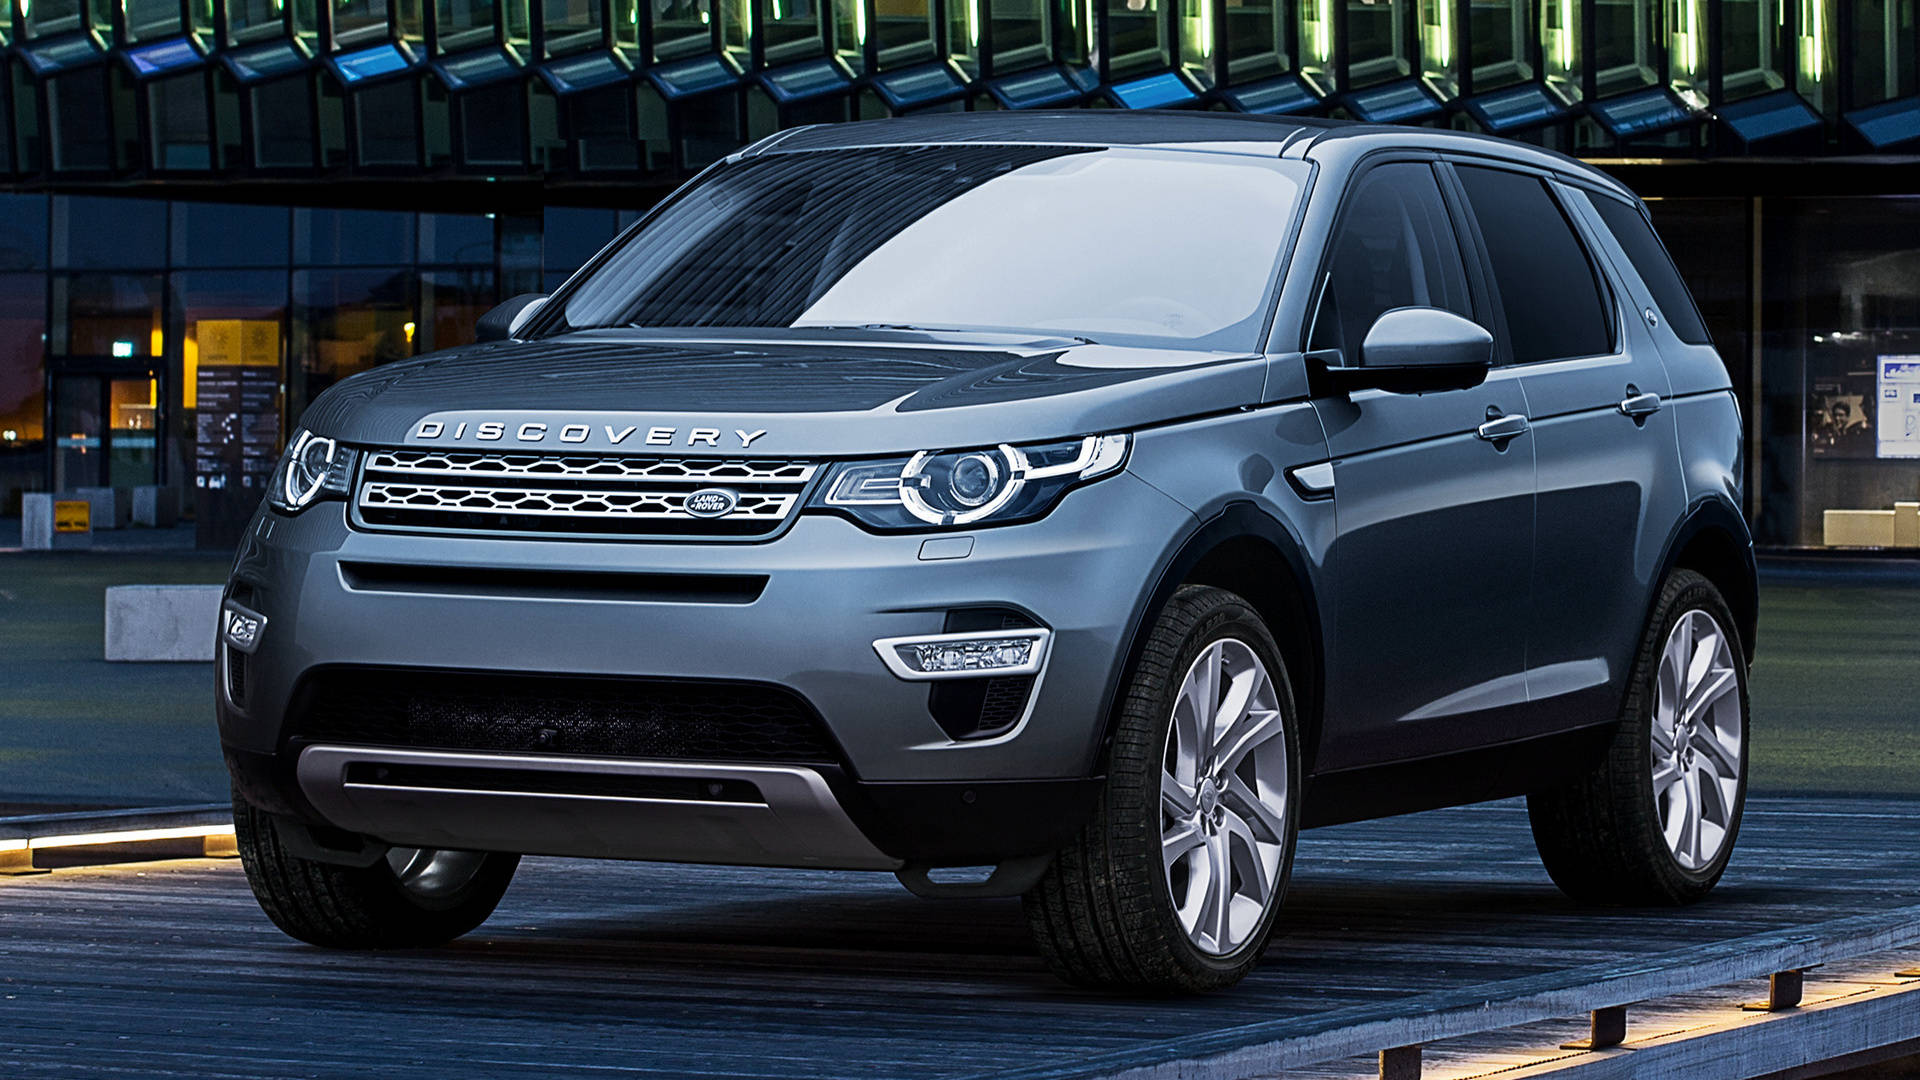 2016 Discovery Land Rover Iphone